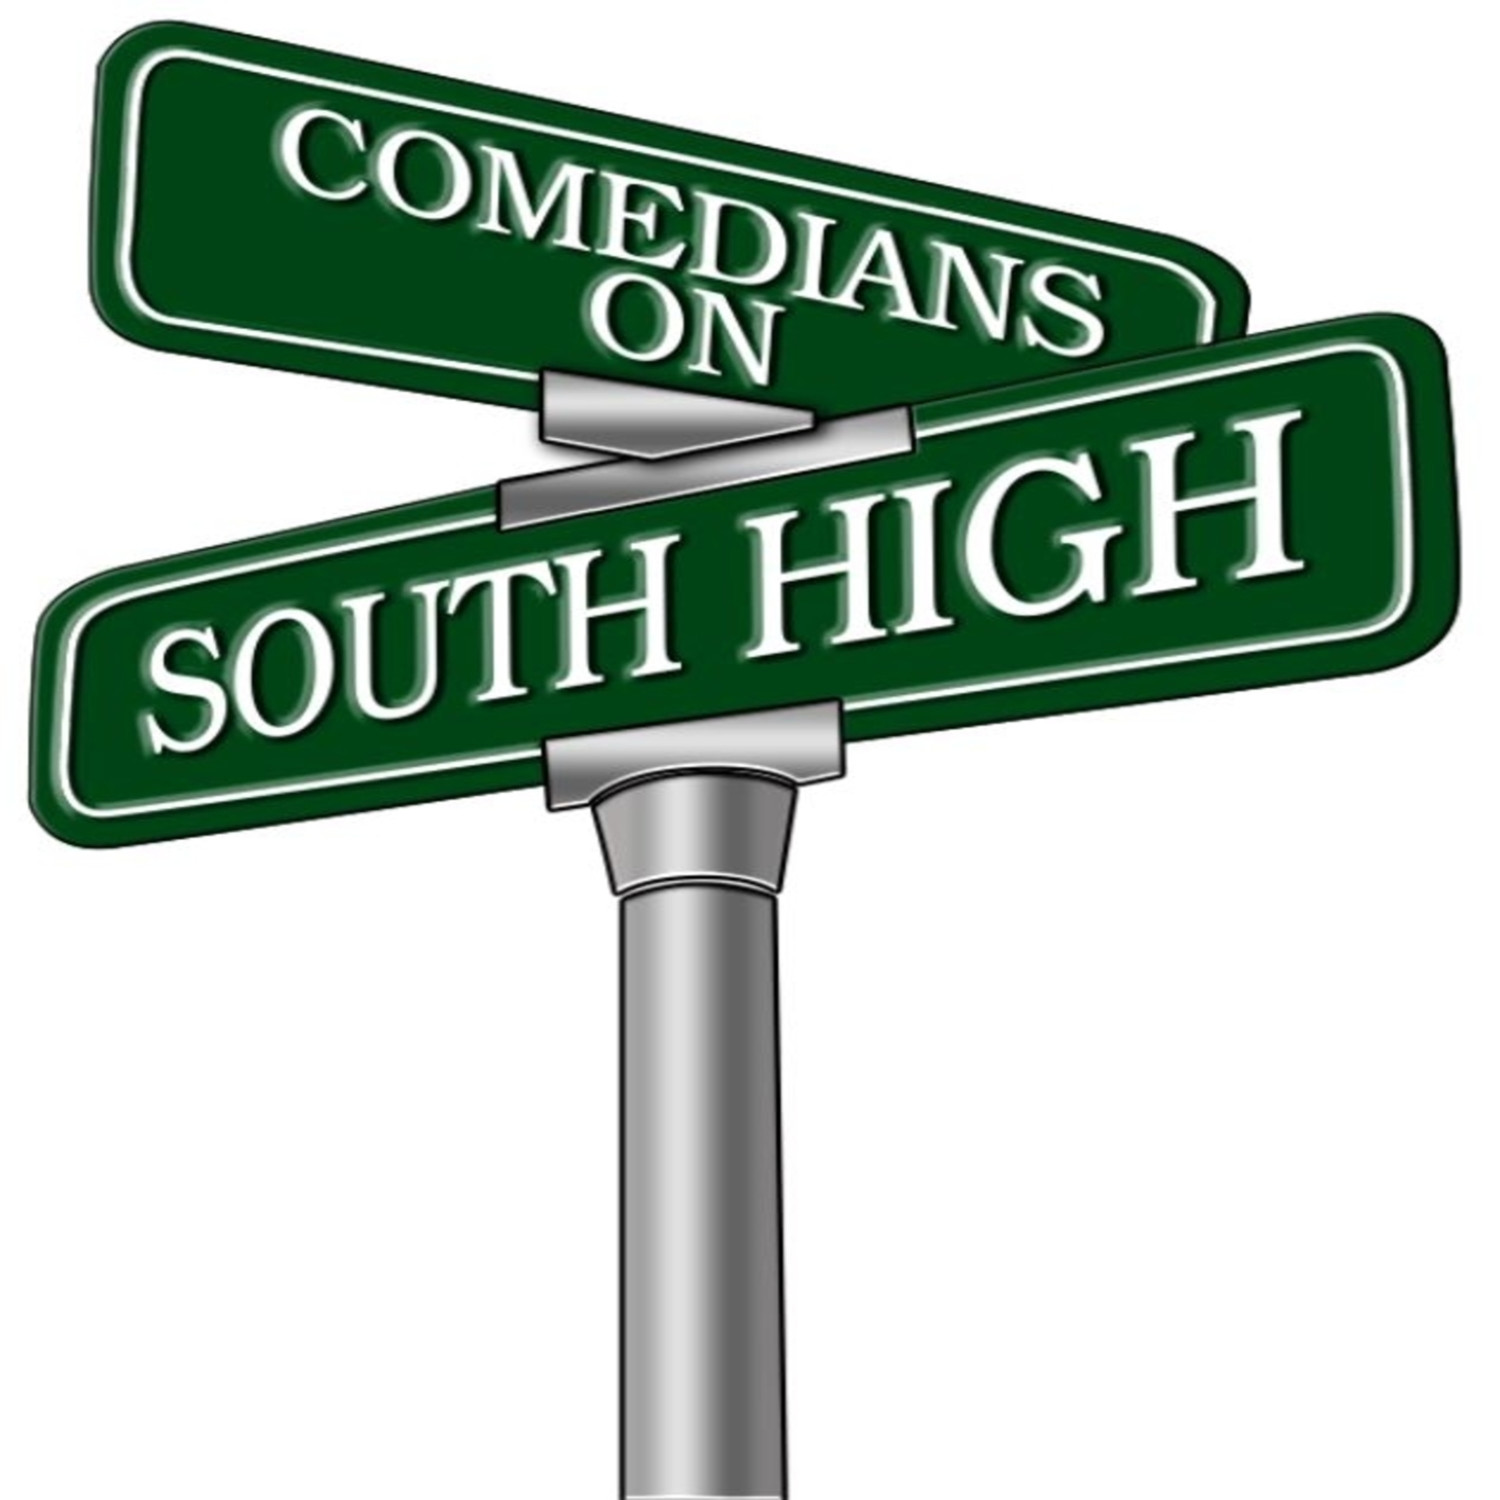 Comedians On South High Podcast